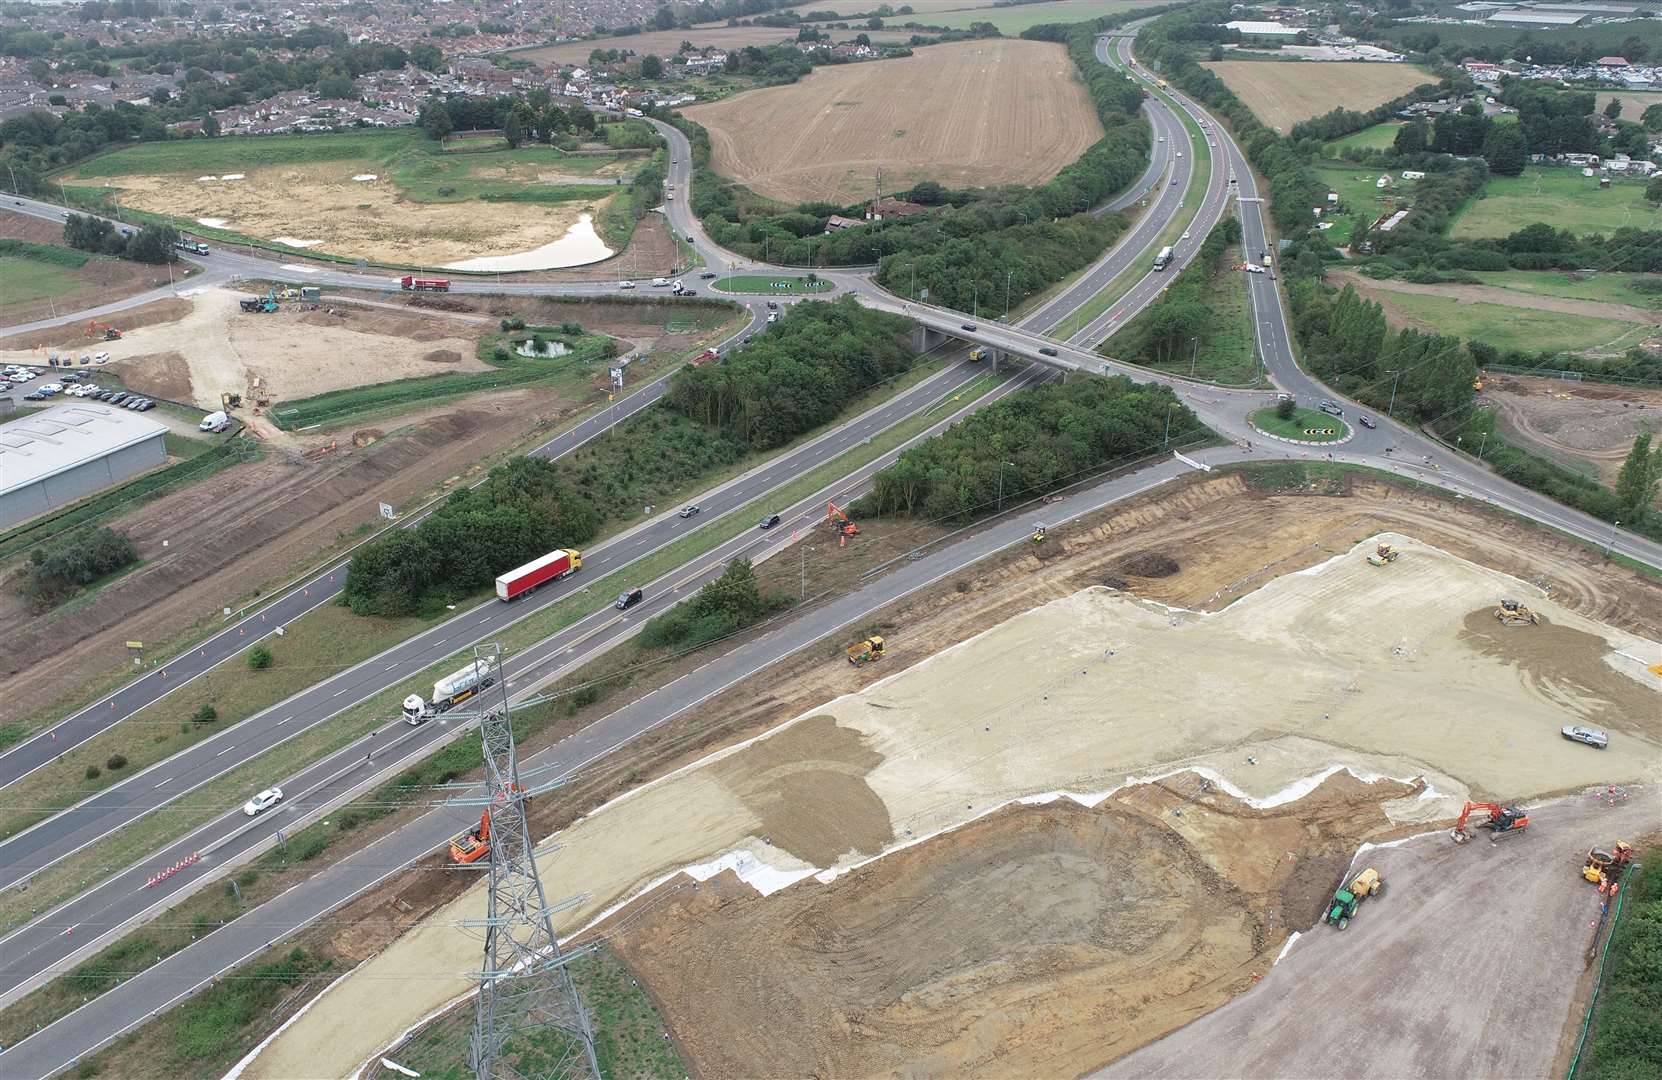 An aerial view of the Grovehurst junction which will be worked on for over a year